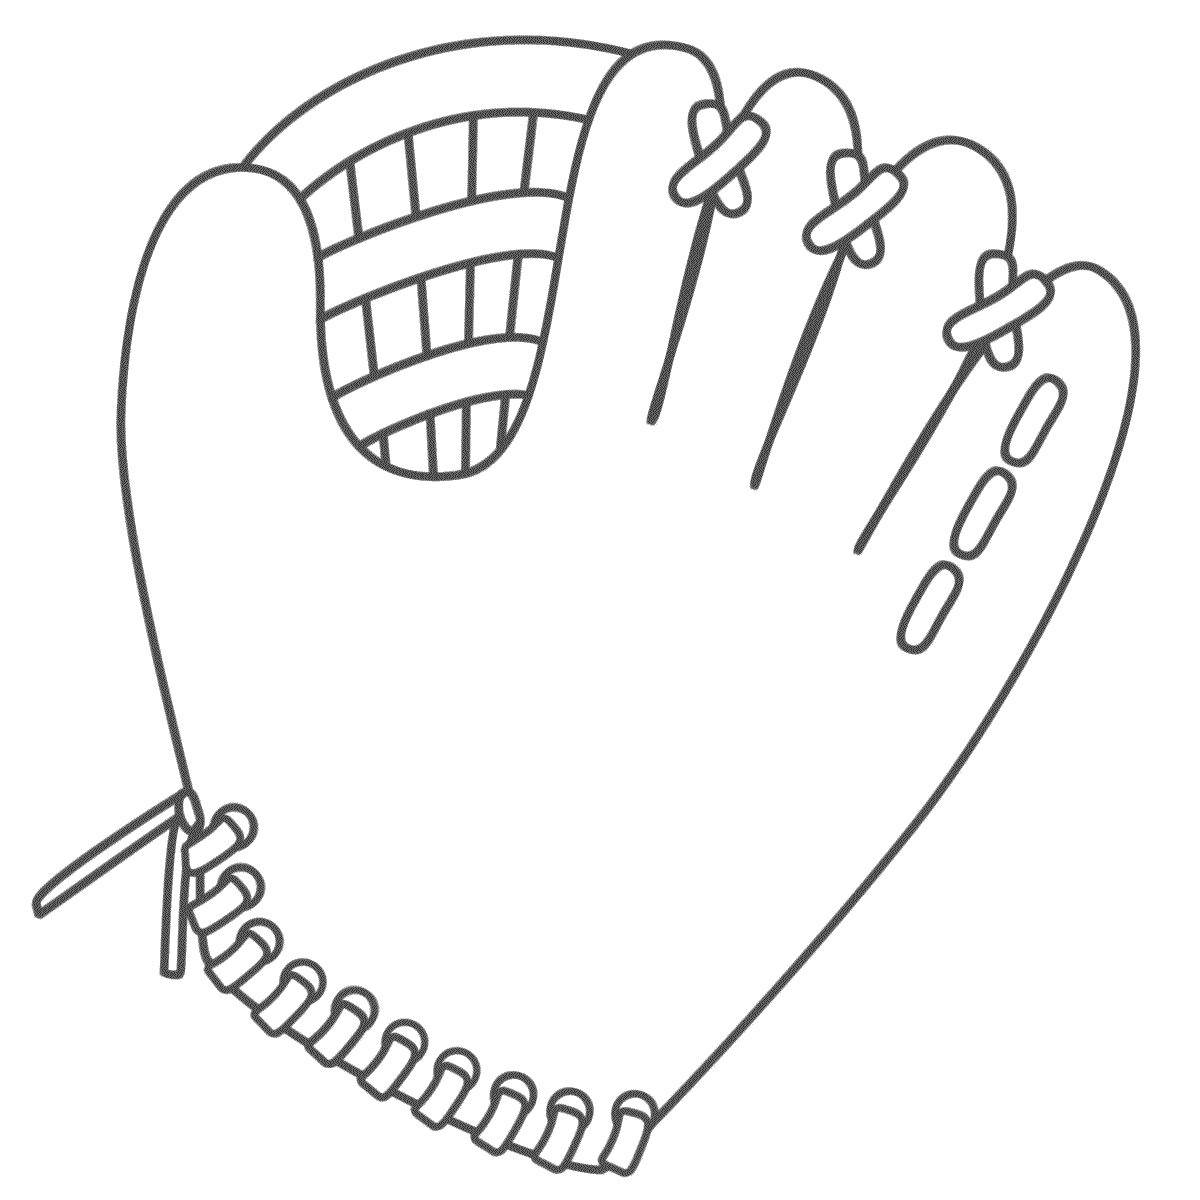 Free Gloves Clipart Black And White, Download Free Clip Art.